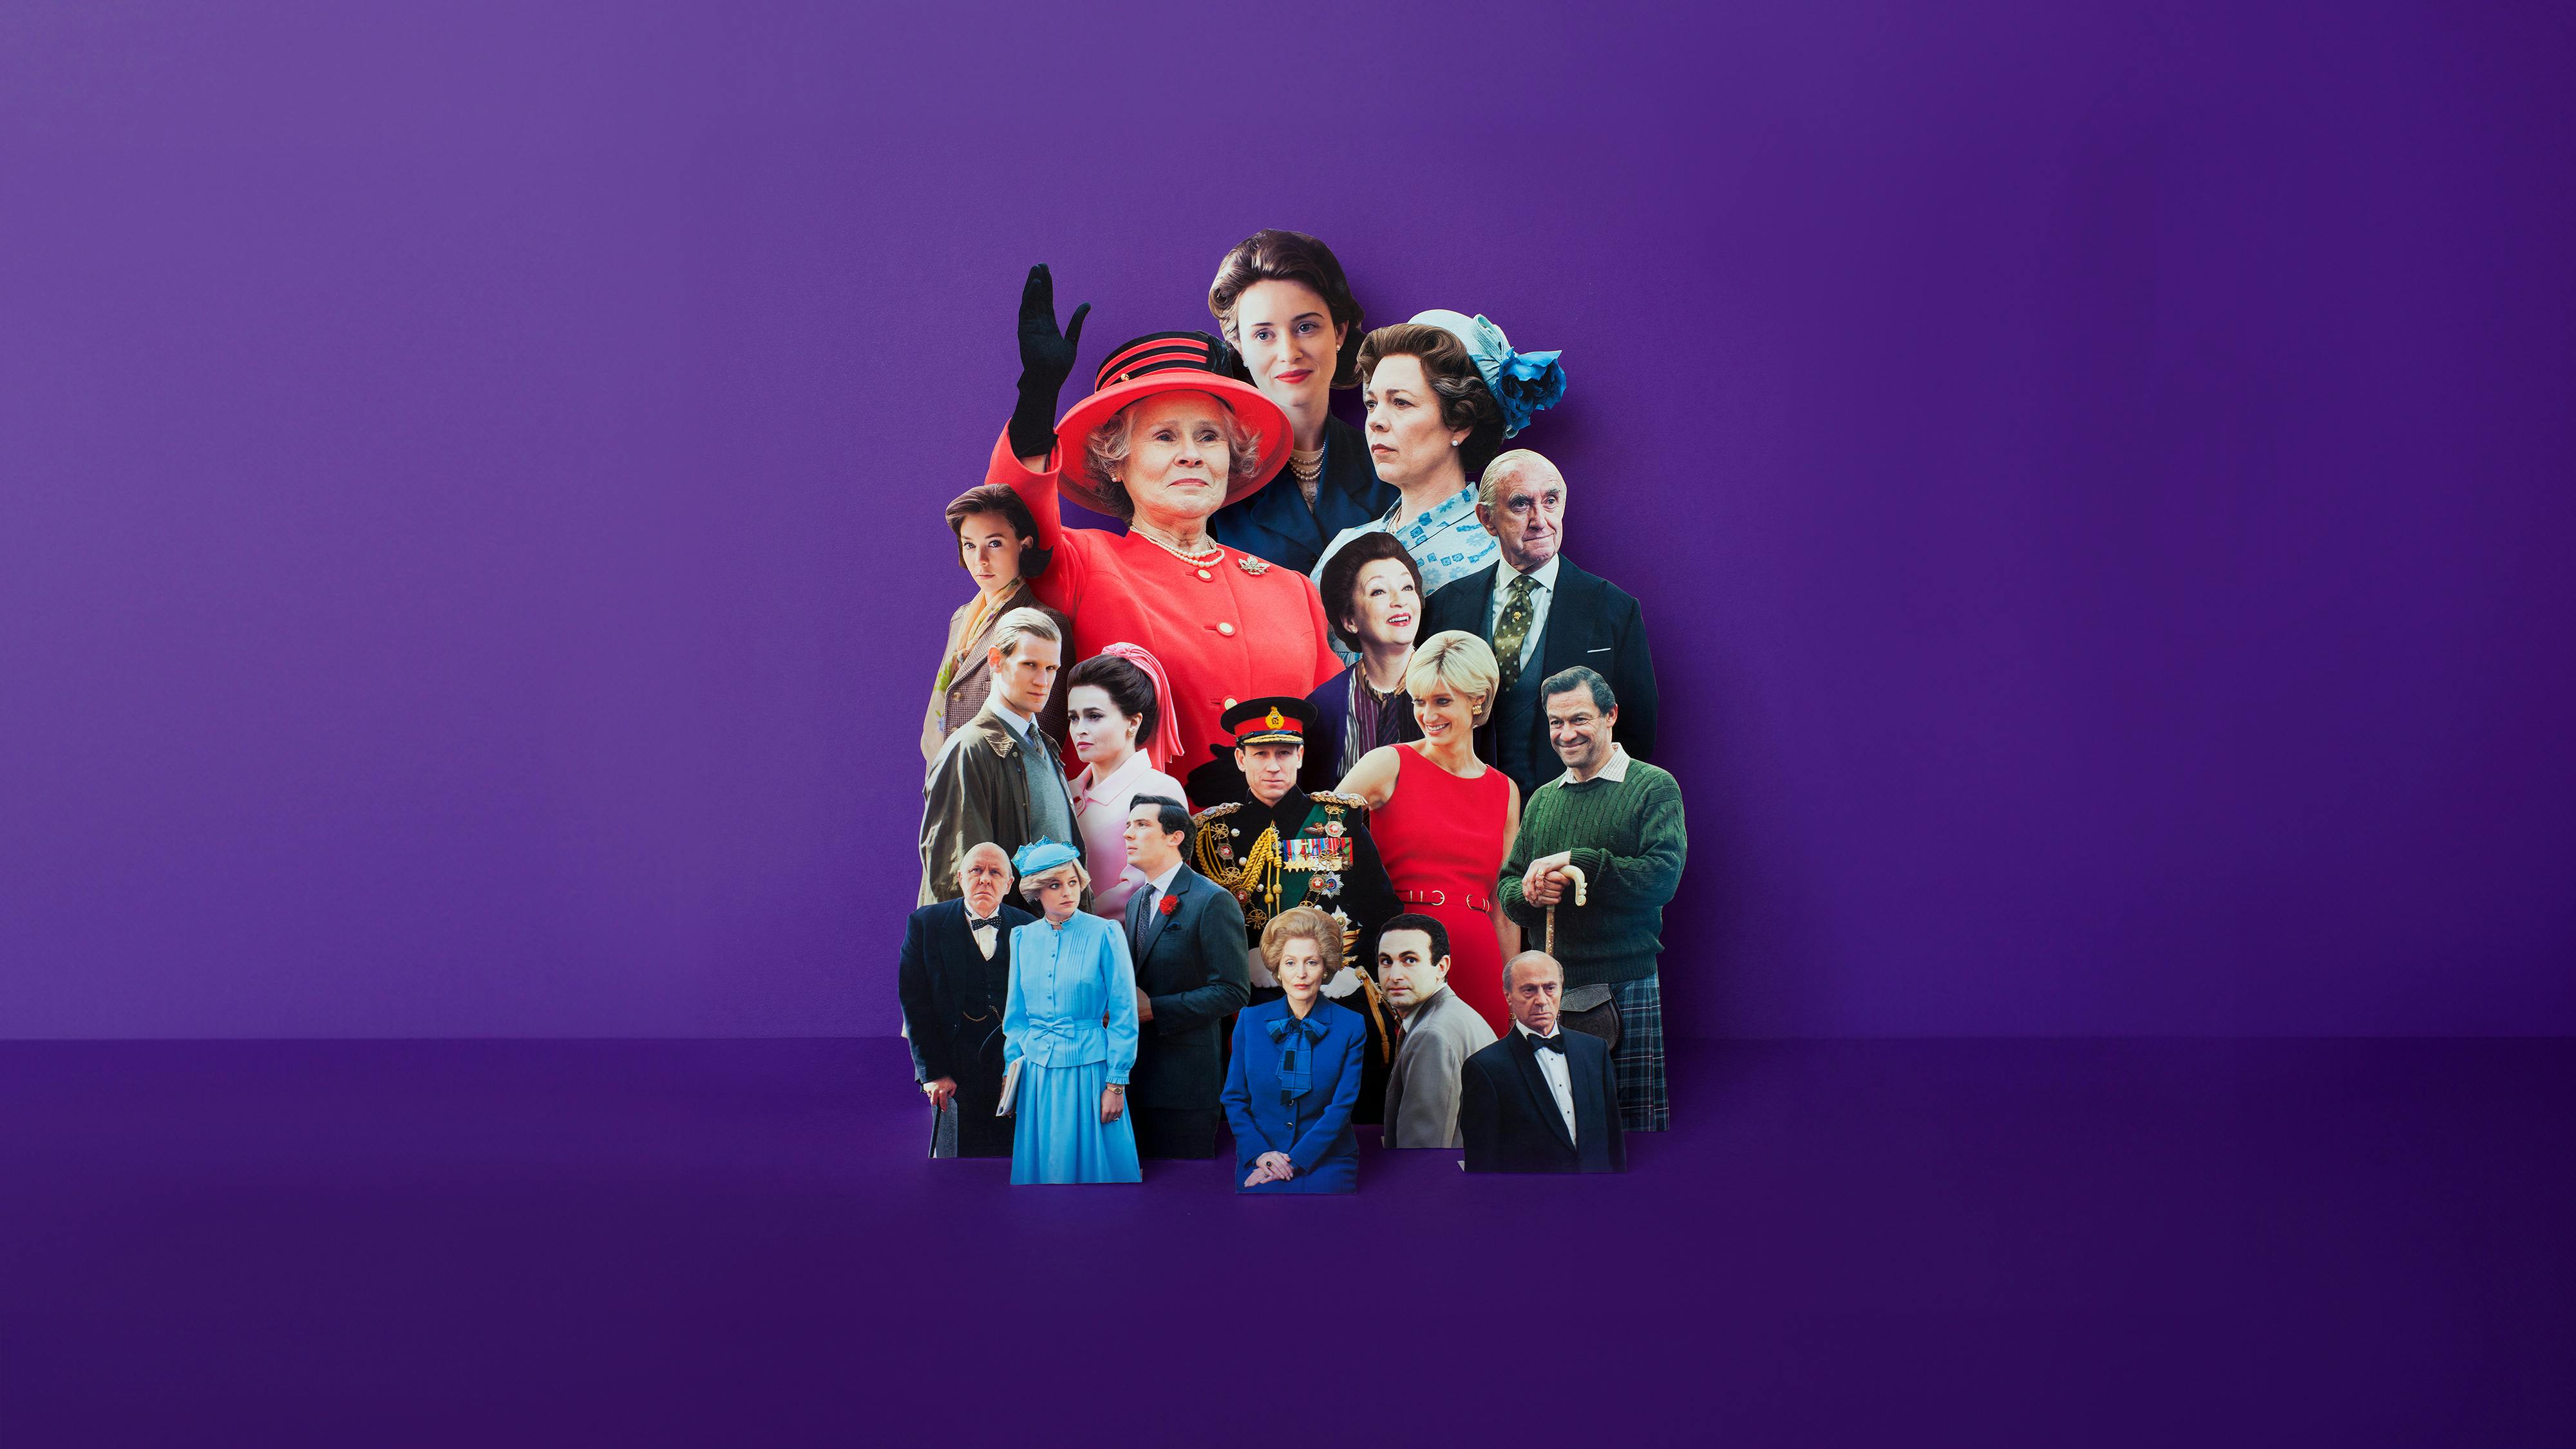 A collage of The Crown cast, over the years. In the top corner are the three actors who play the queen (Imelda Staunton, Claire Foy, and Olivia Colman); clockwise from the queens are Jonathan Pryce, Lesley Manville. Elizabeth Debicki, Dominic West, Salim Daw, Khalid Abdalla, Gillian Anderson, Matt Smith, Josh O'Connor, Emma Corrin, Joth Lithigow, Helena Bonham Carter, and Vanessa Virby.